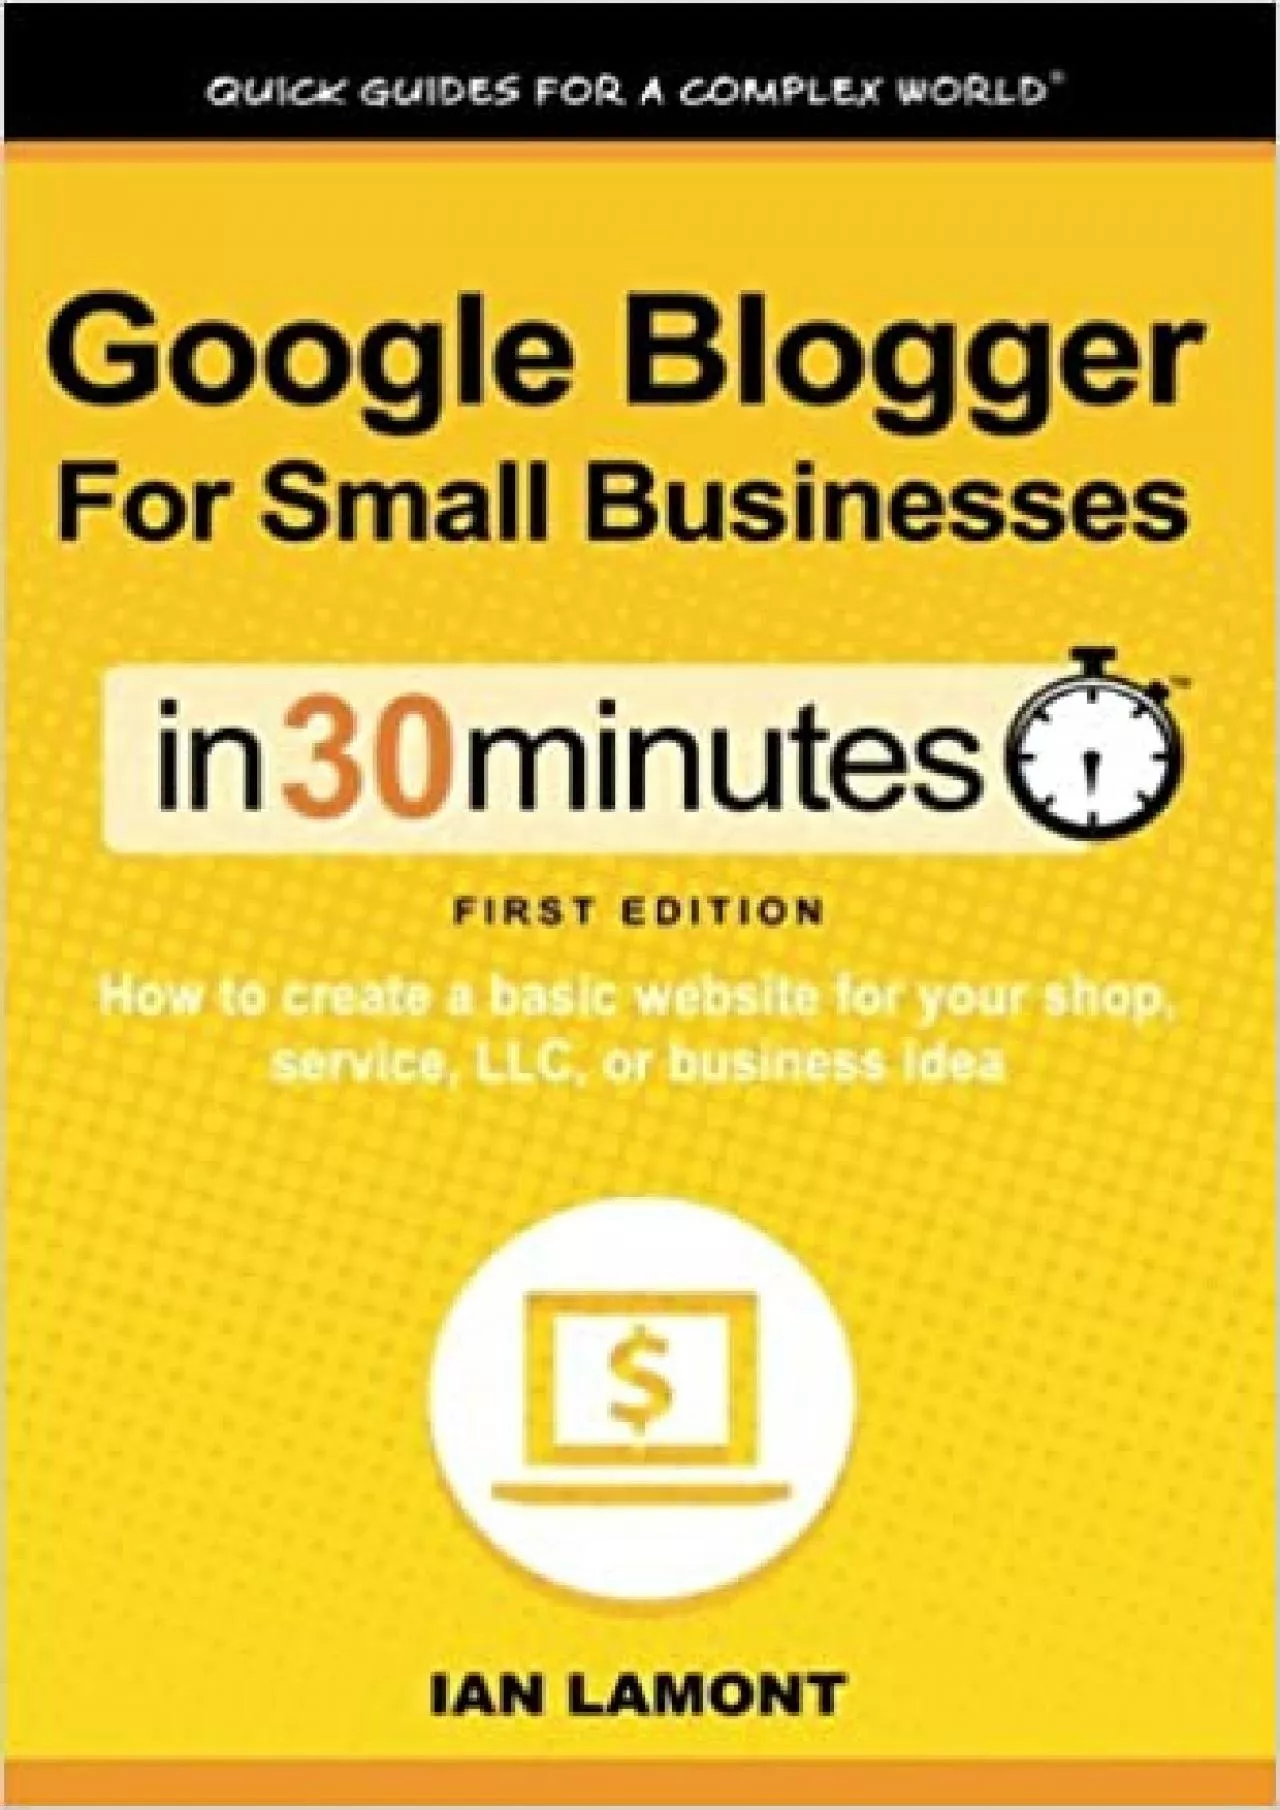 Google Blogger For Small Businesses In 30 Minutes How to create a basic website for your